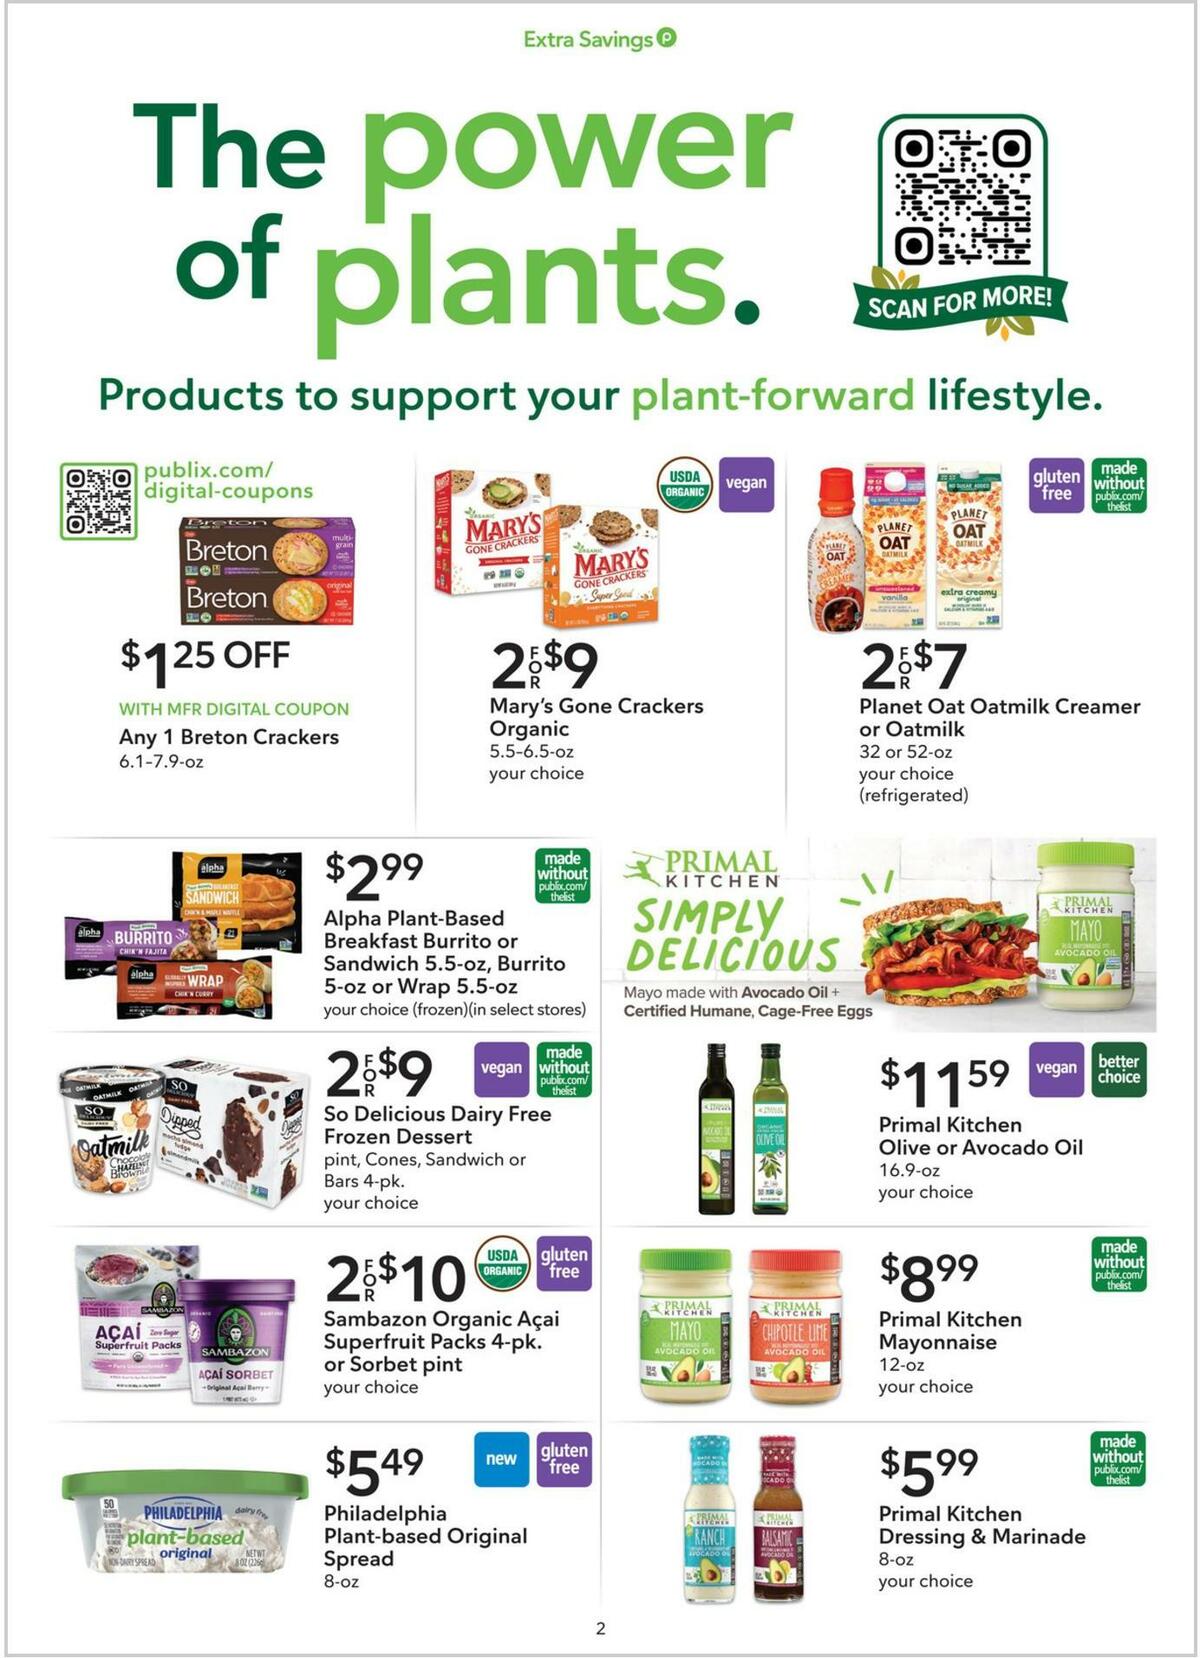 Publix Extra Savings Weekly Ad from June 17